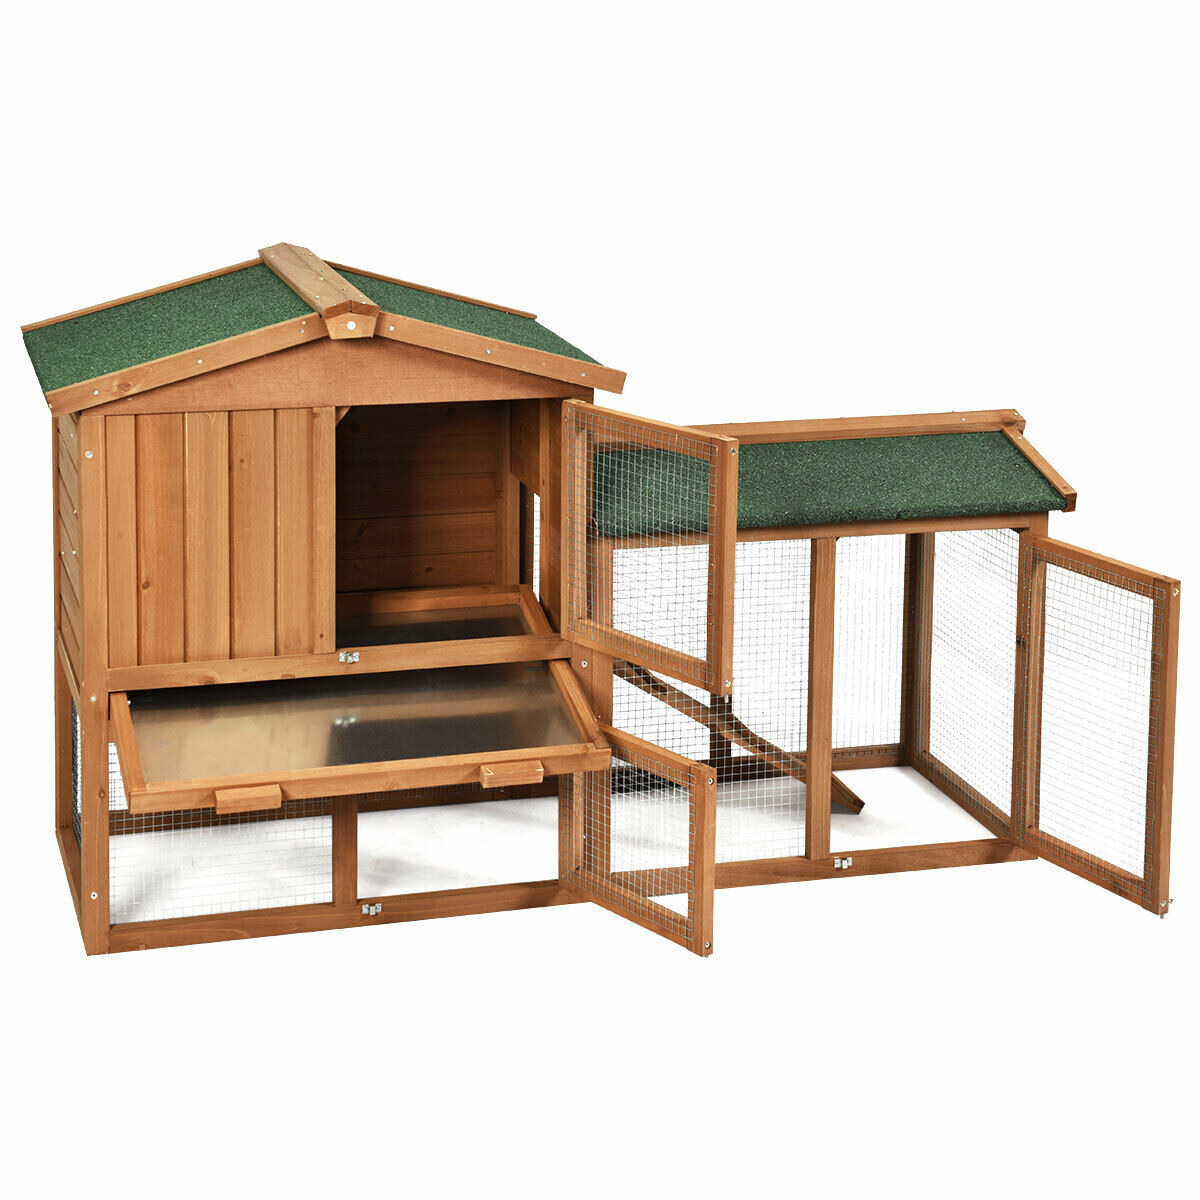 2 Floors Wooden Poultry / Rabbit Hutch with Removable Ramp